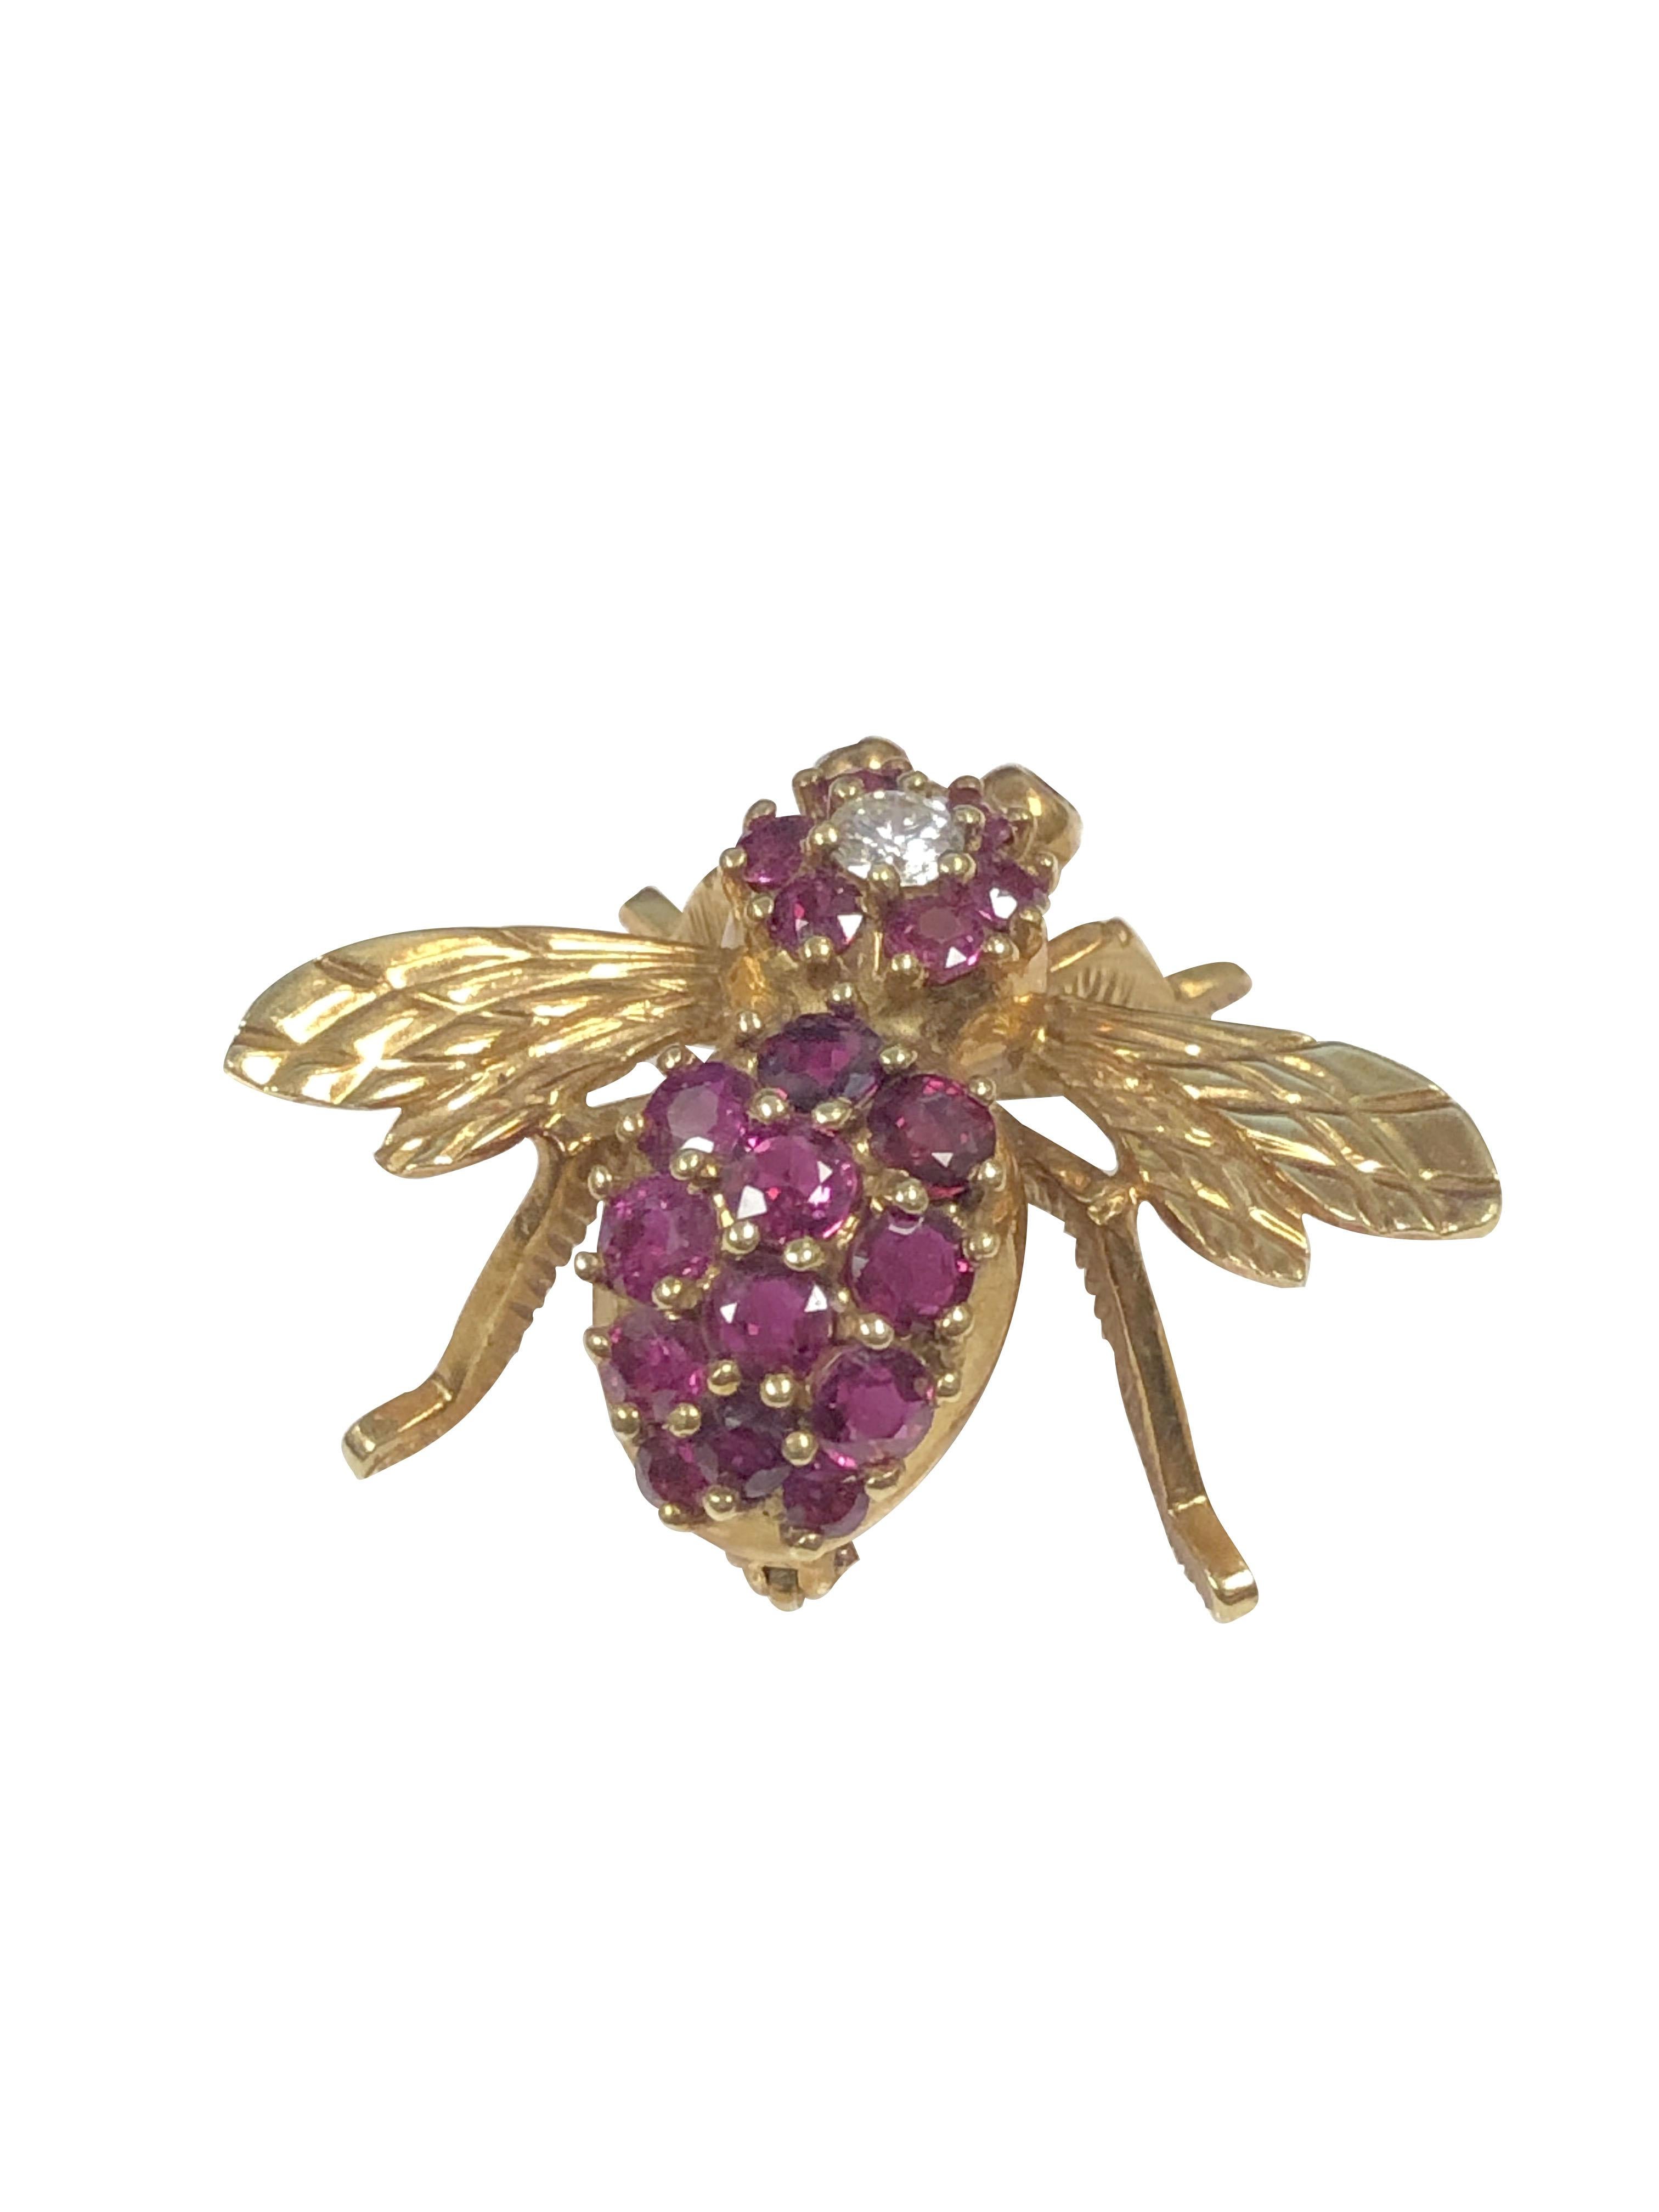 Circa 1980 Herbert Rosenthal 18K Yellow Gold Bee Brooch, measuring 1 inch in length and 1 1/4 inches wide from Wing tip to tip, finely detailed with Ruby Eyes and further set with Very Fine Color Rubies totaling 1 carat and centrally set with a